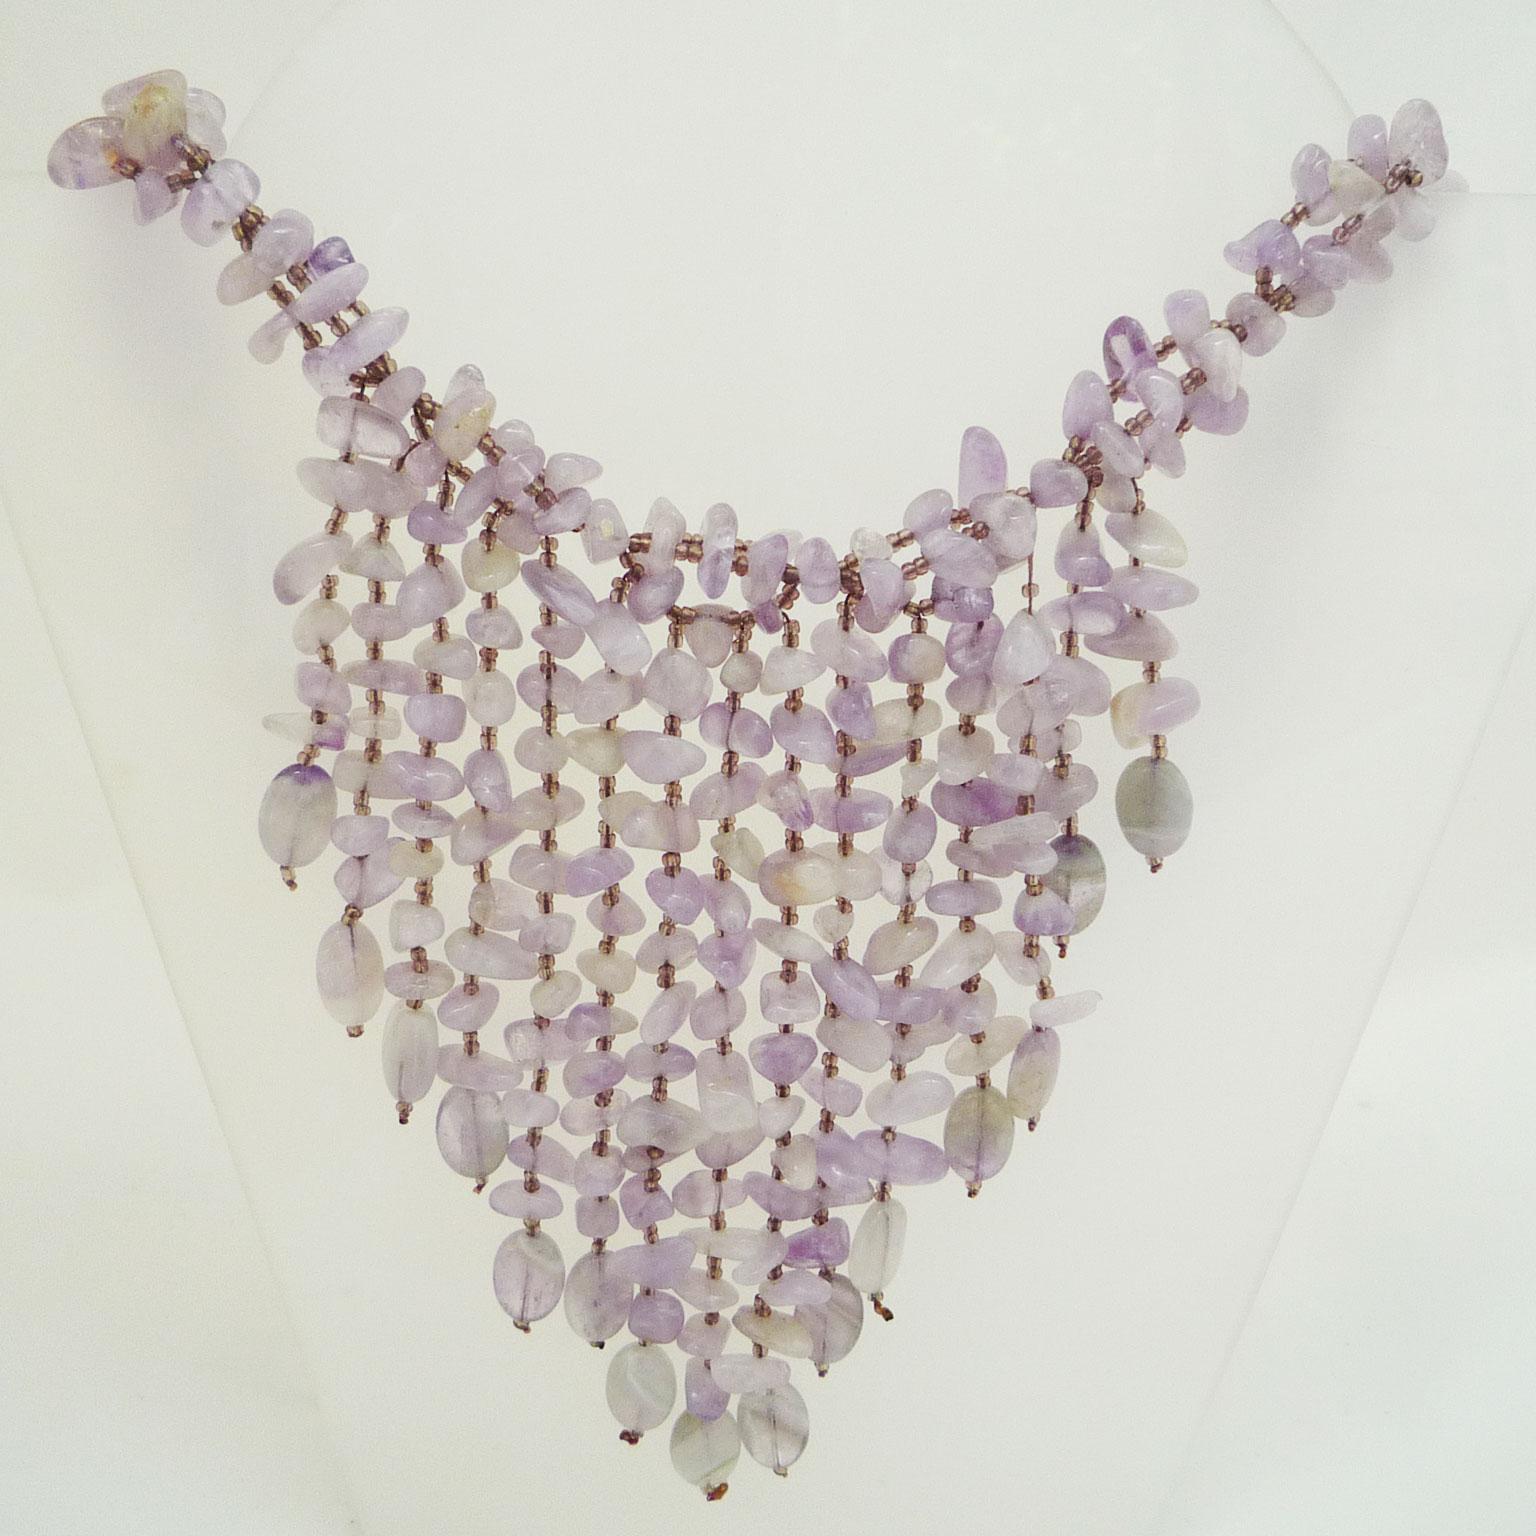 Statement amethyst necklace
Opulent necklace made of rose´farbenen natural stones. 
Two interwoven strands of cut amethysts carry a pendant of chains of different lengths (up to 14 cm) of this precious natural stone.
Handmade, modern design